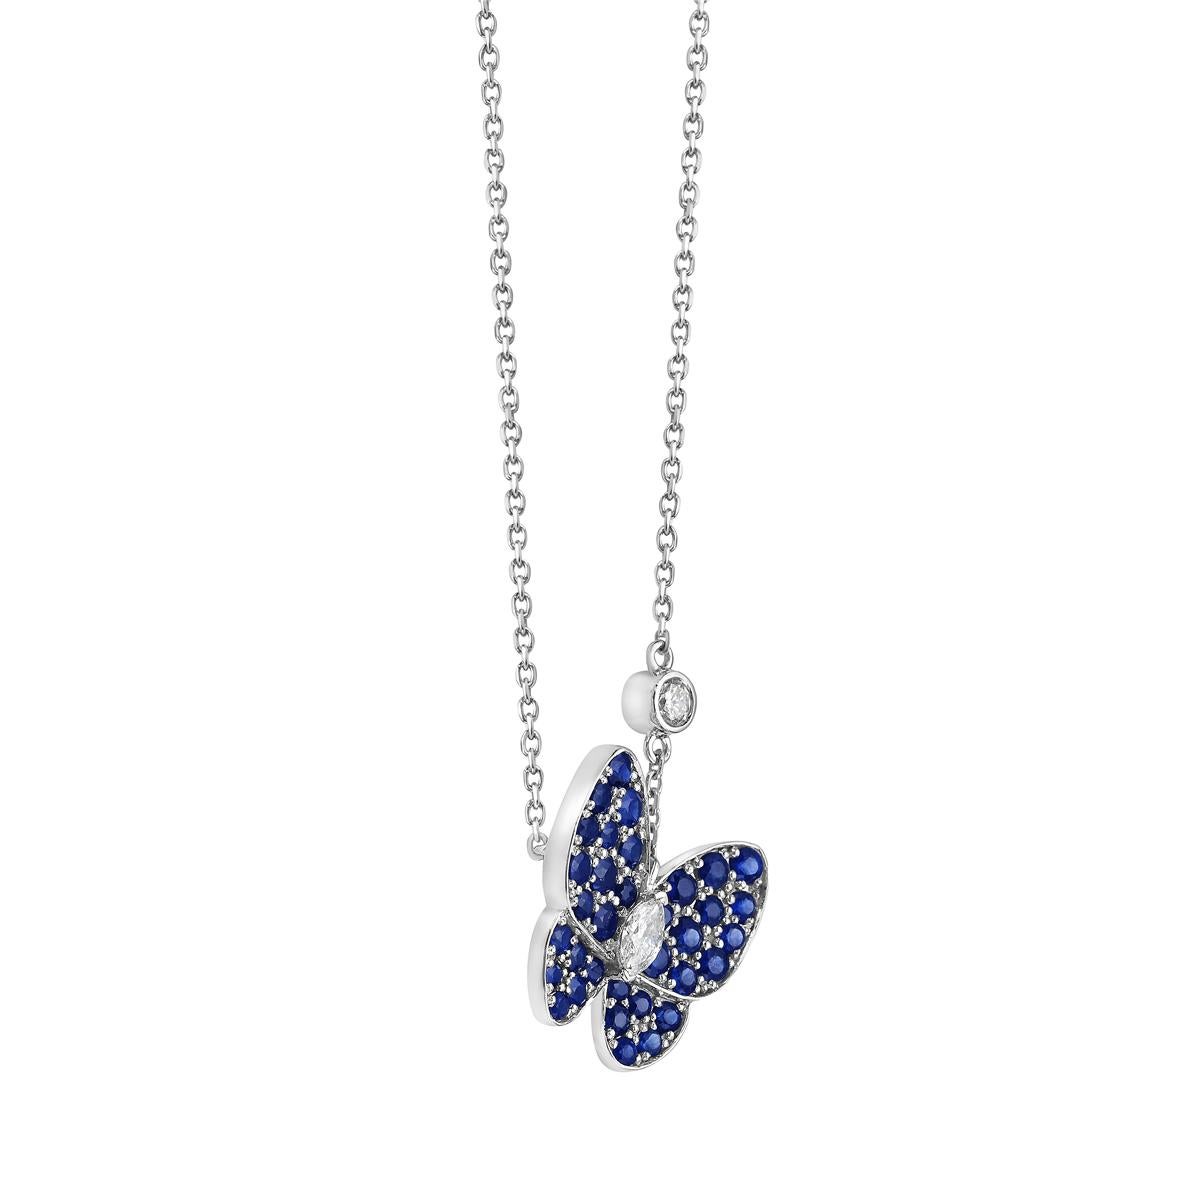 This beautiful butterfly pendant is made from 4.15 grams of 14 karat white gold. The butterfly shape is made from 34 sapphires totaling 1.17 carats with SI1-SI2, GH color diamonds. There are a total of 2 diamonds, one round and one marquise, making